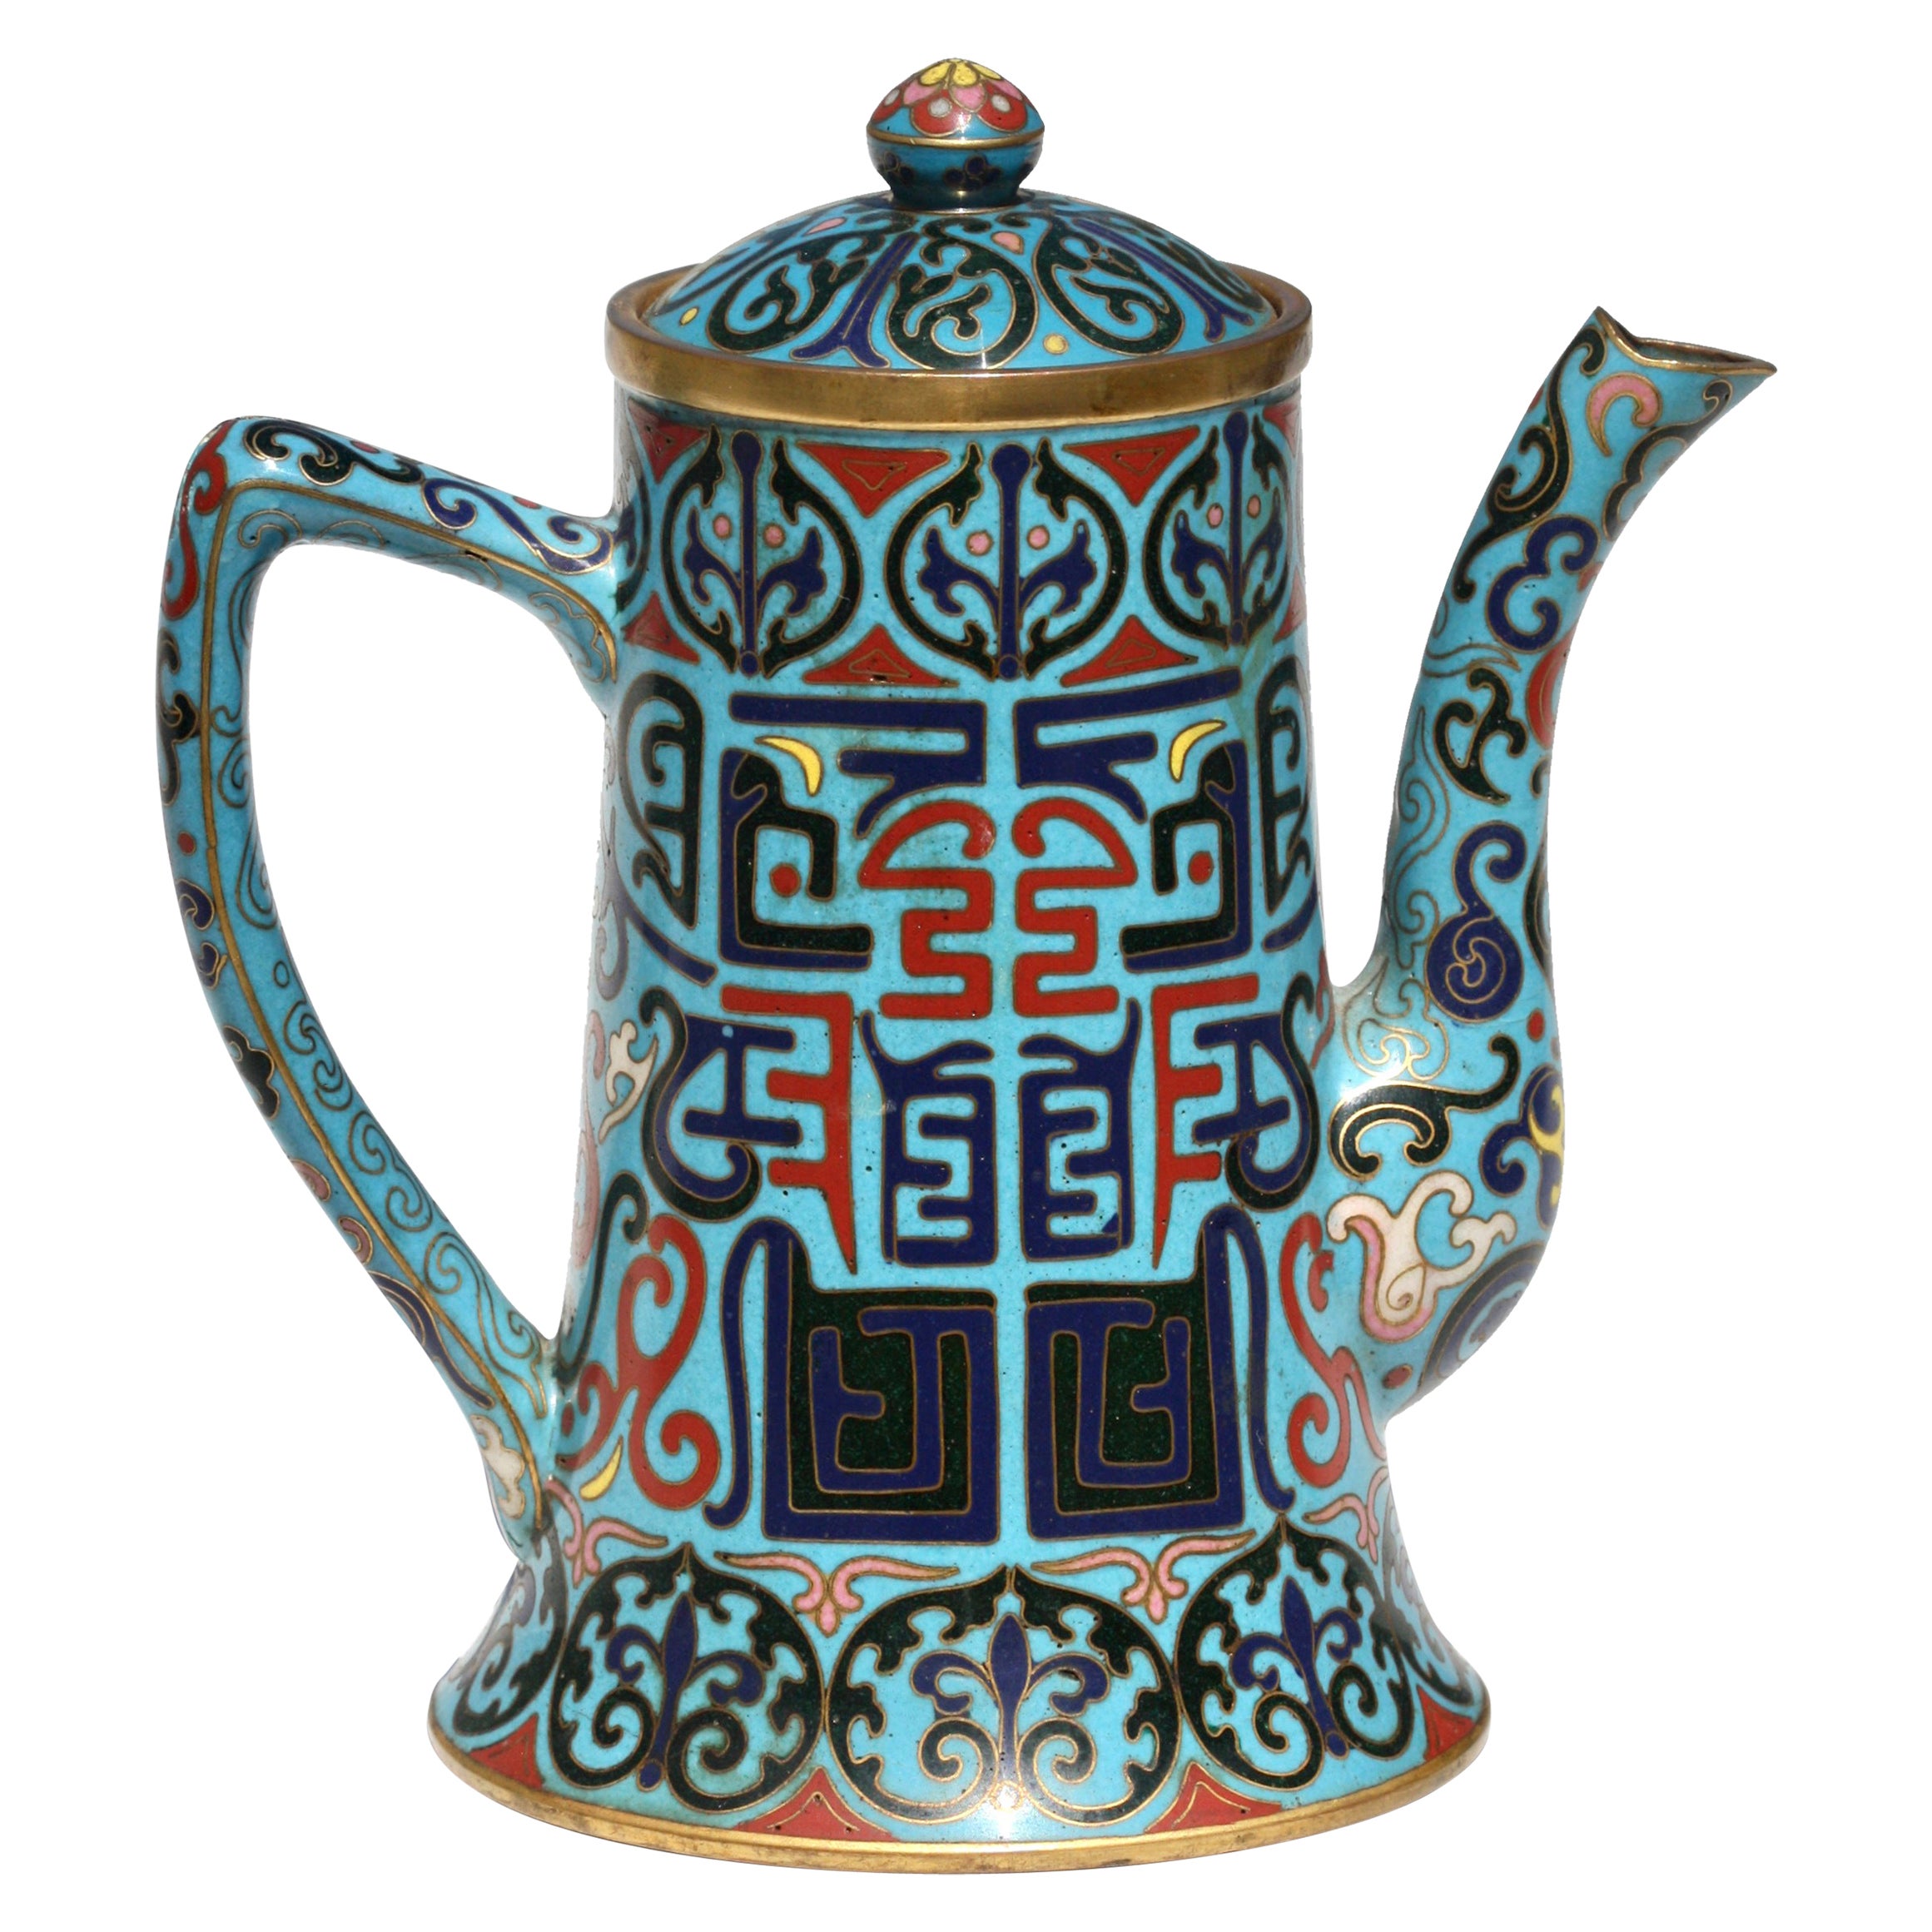 Chinese Cloisonné Enamel Teapot and Cover